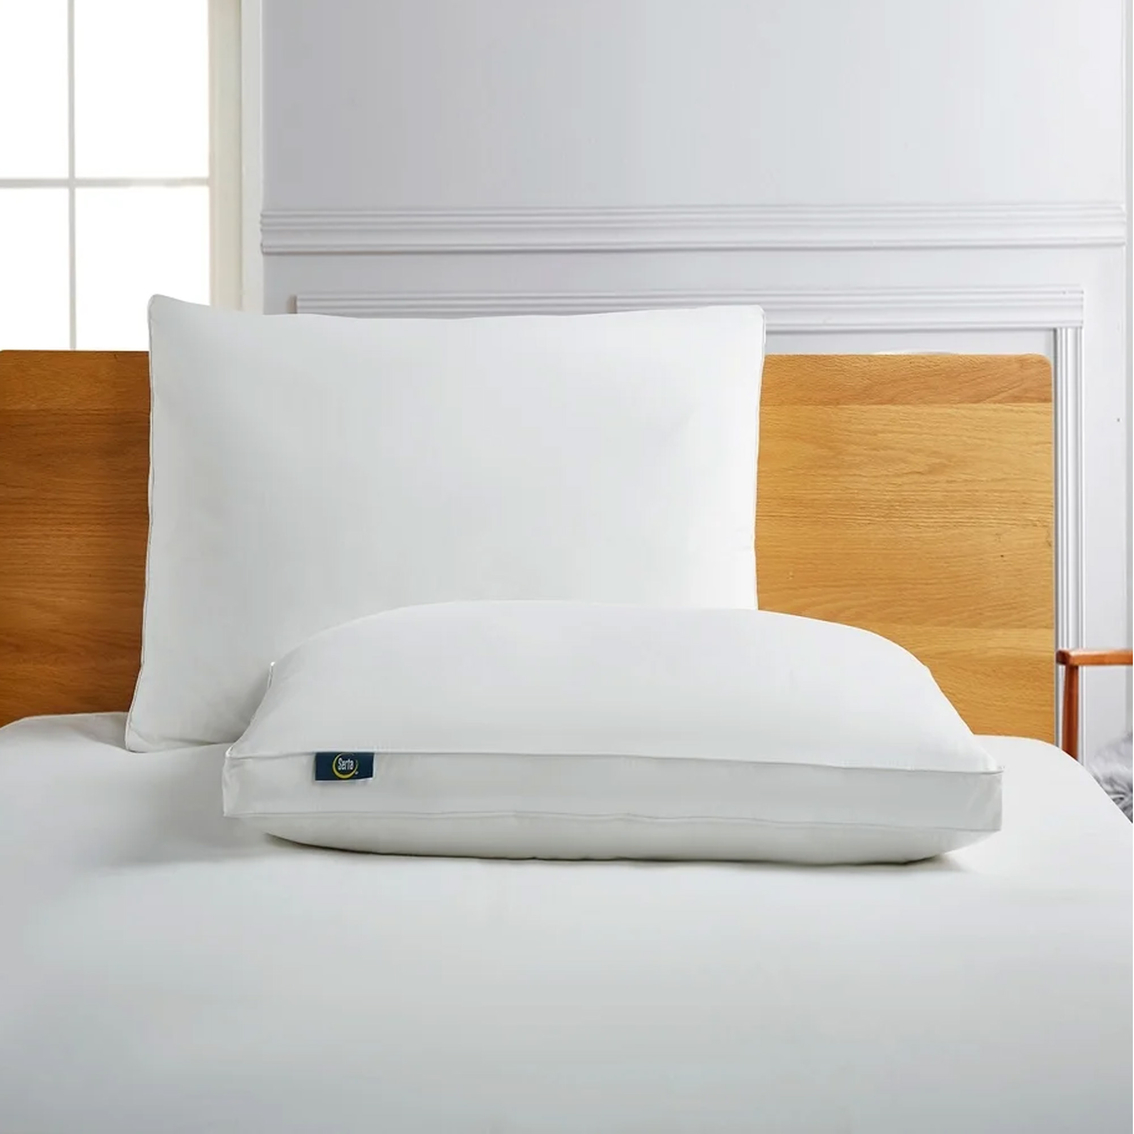 Serta White Goose Feather and Down Fiber Side Sleeper Pillow, 2 pk. - Image 3 of 3